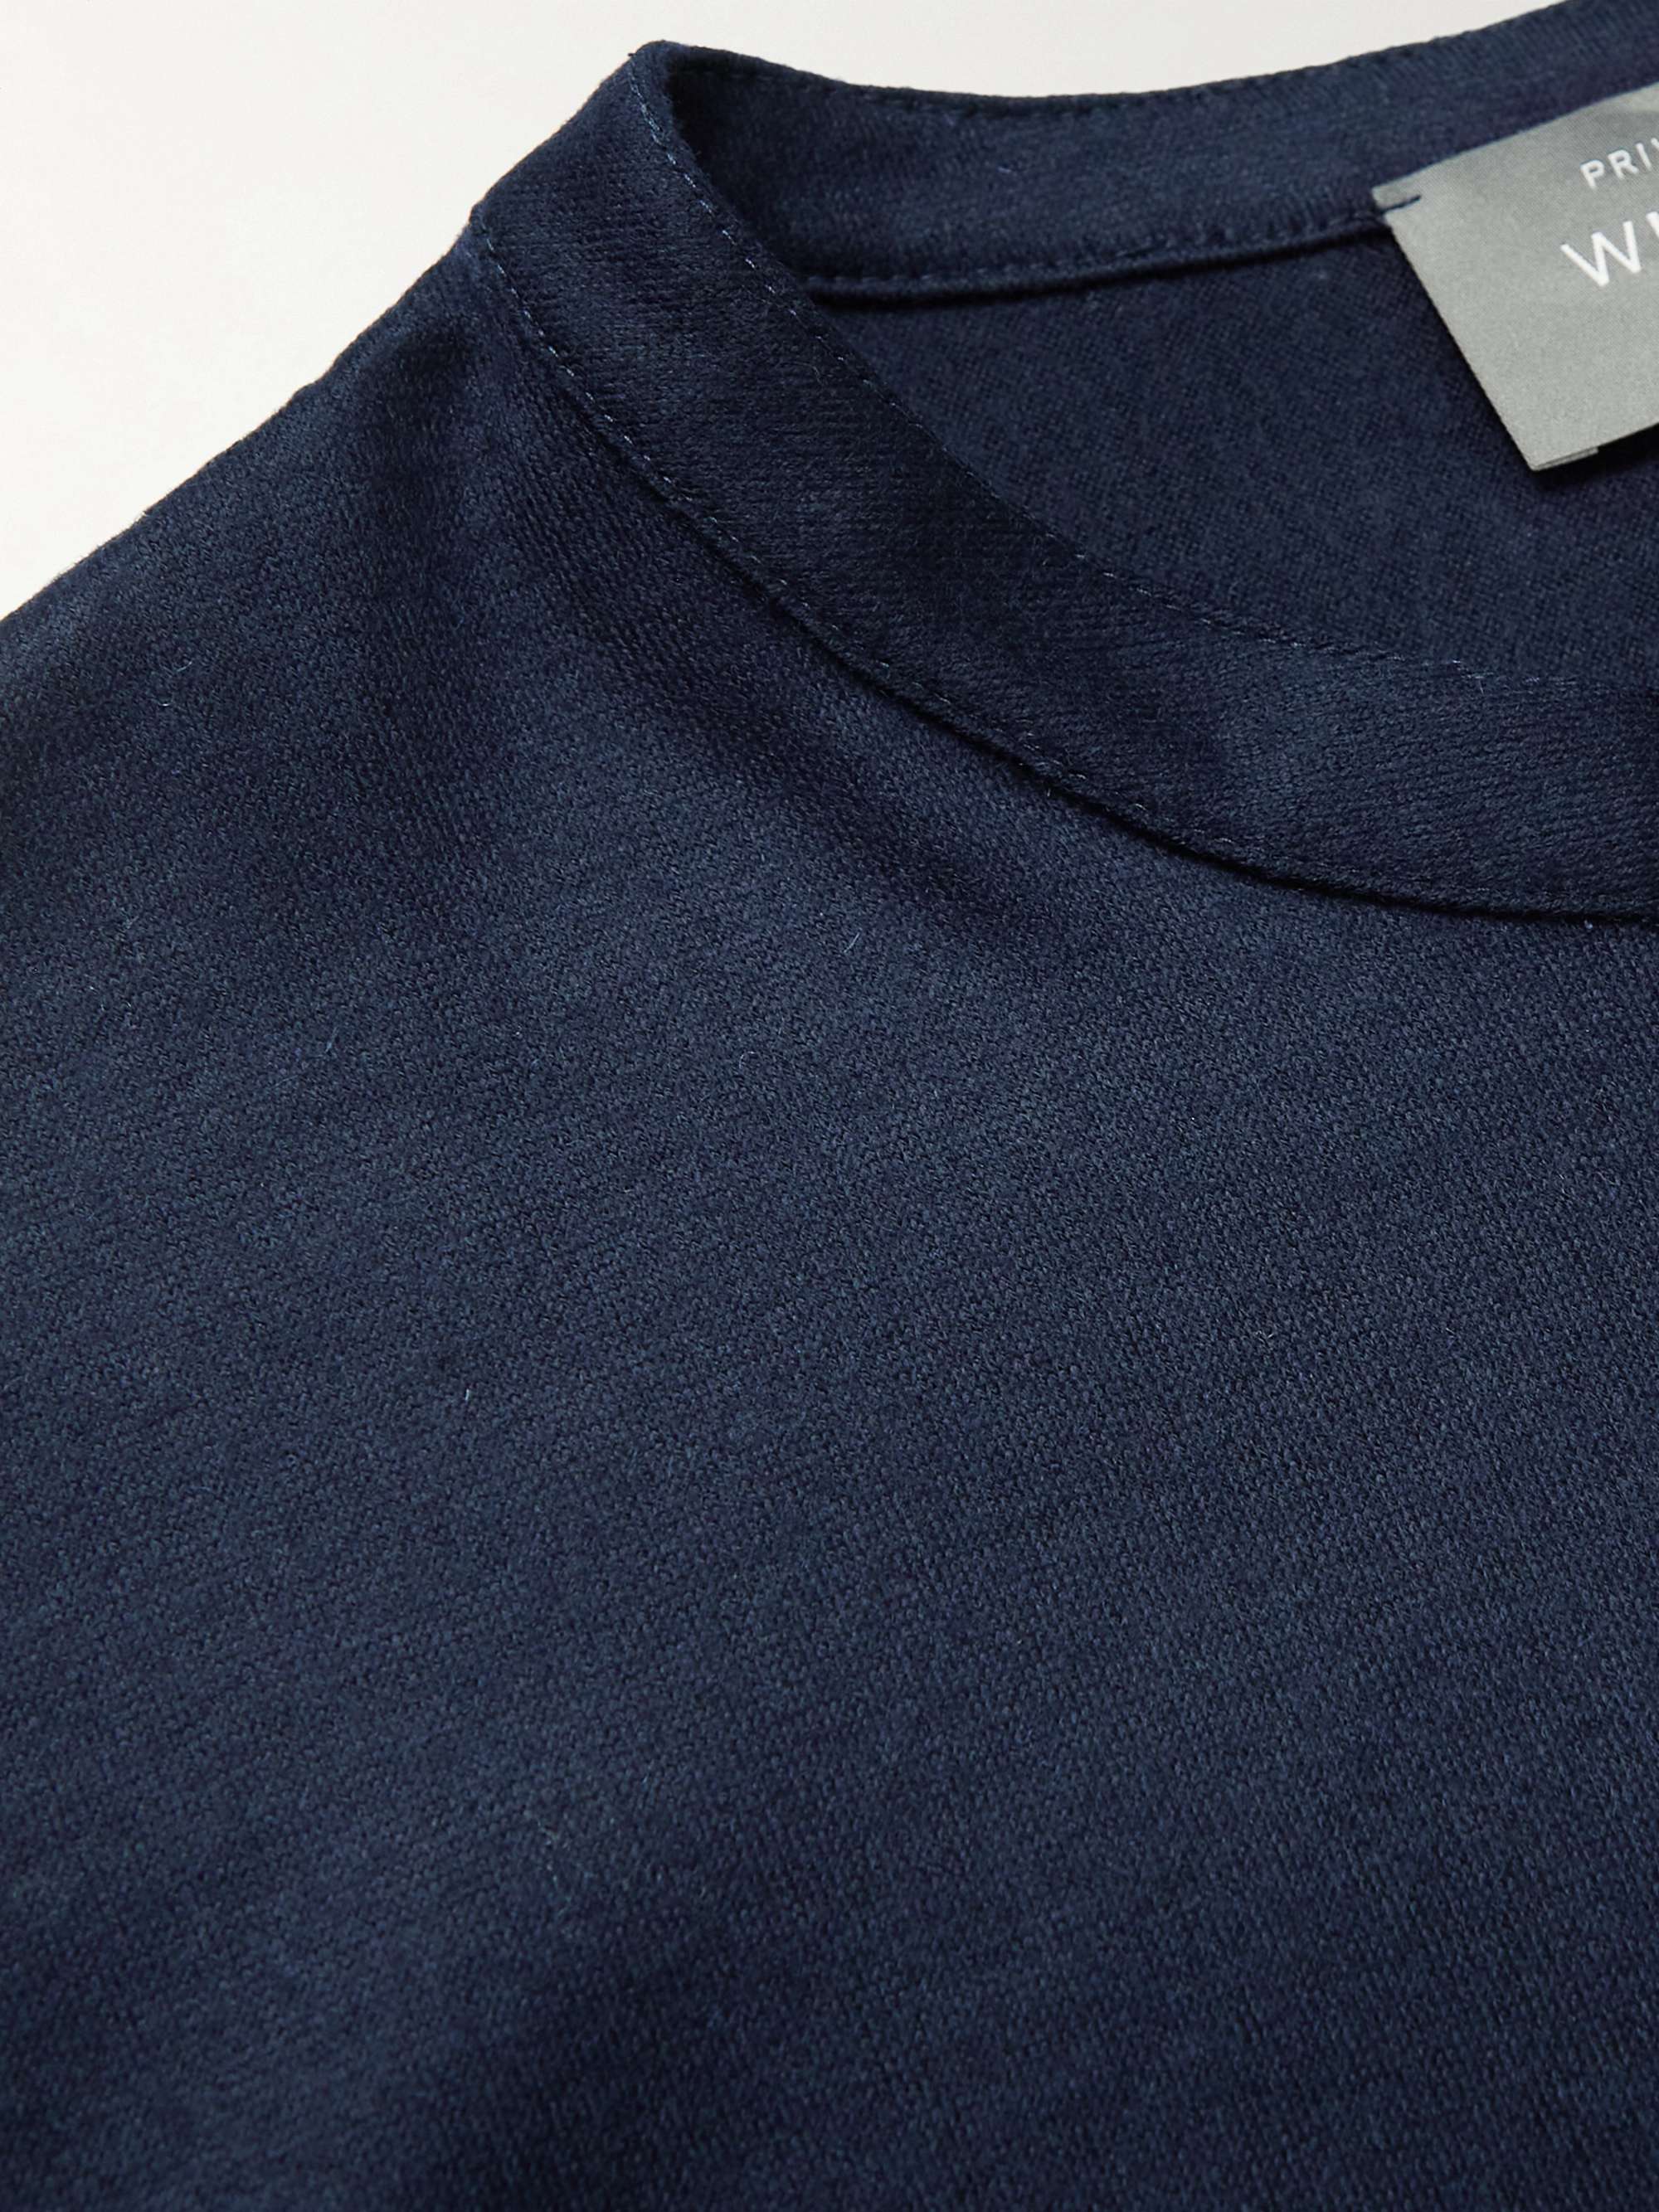 PRIVATE WHITE V.C. Wool and Cashmere-Blend Jersey Henley T-Shirt